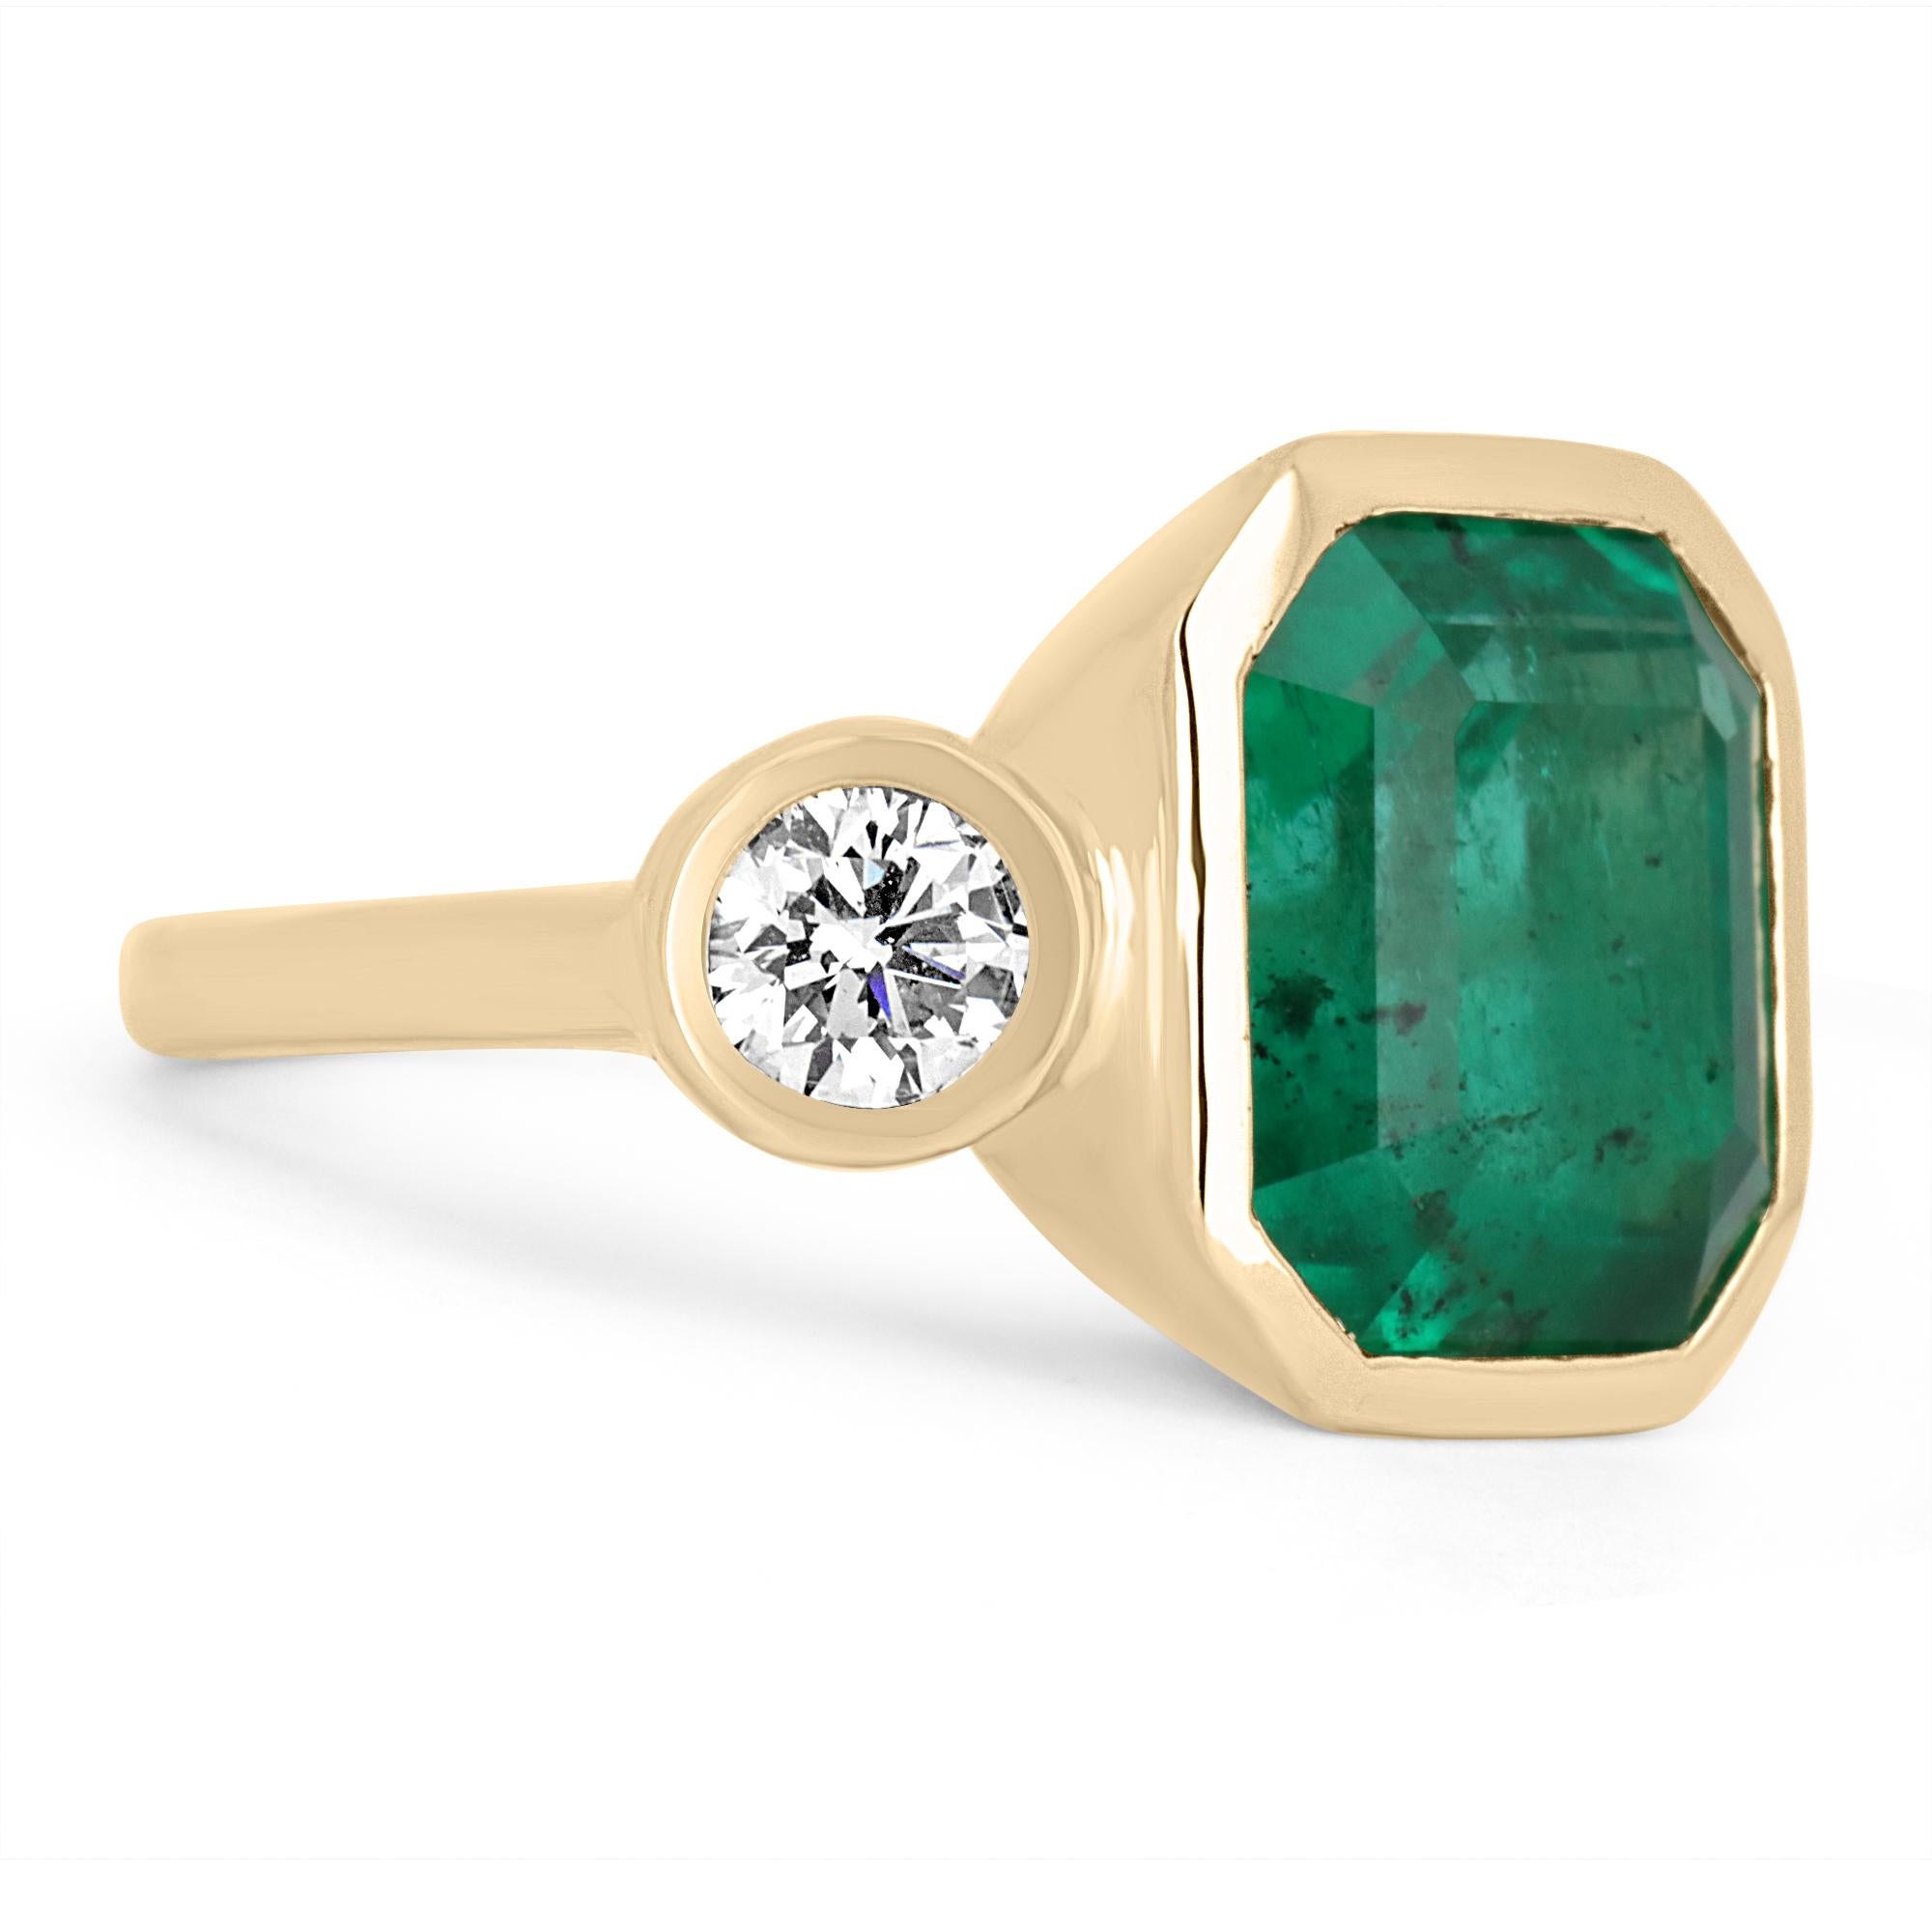 Designed and created by Jorge Rodriguez. Dexterously crafted in fine 18K yellow gold, this ring features a high quality, 10.0-carat natural Colombian emerald, emerald cut from the famous Muzo mines. Set in a secure bezel setting for extra